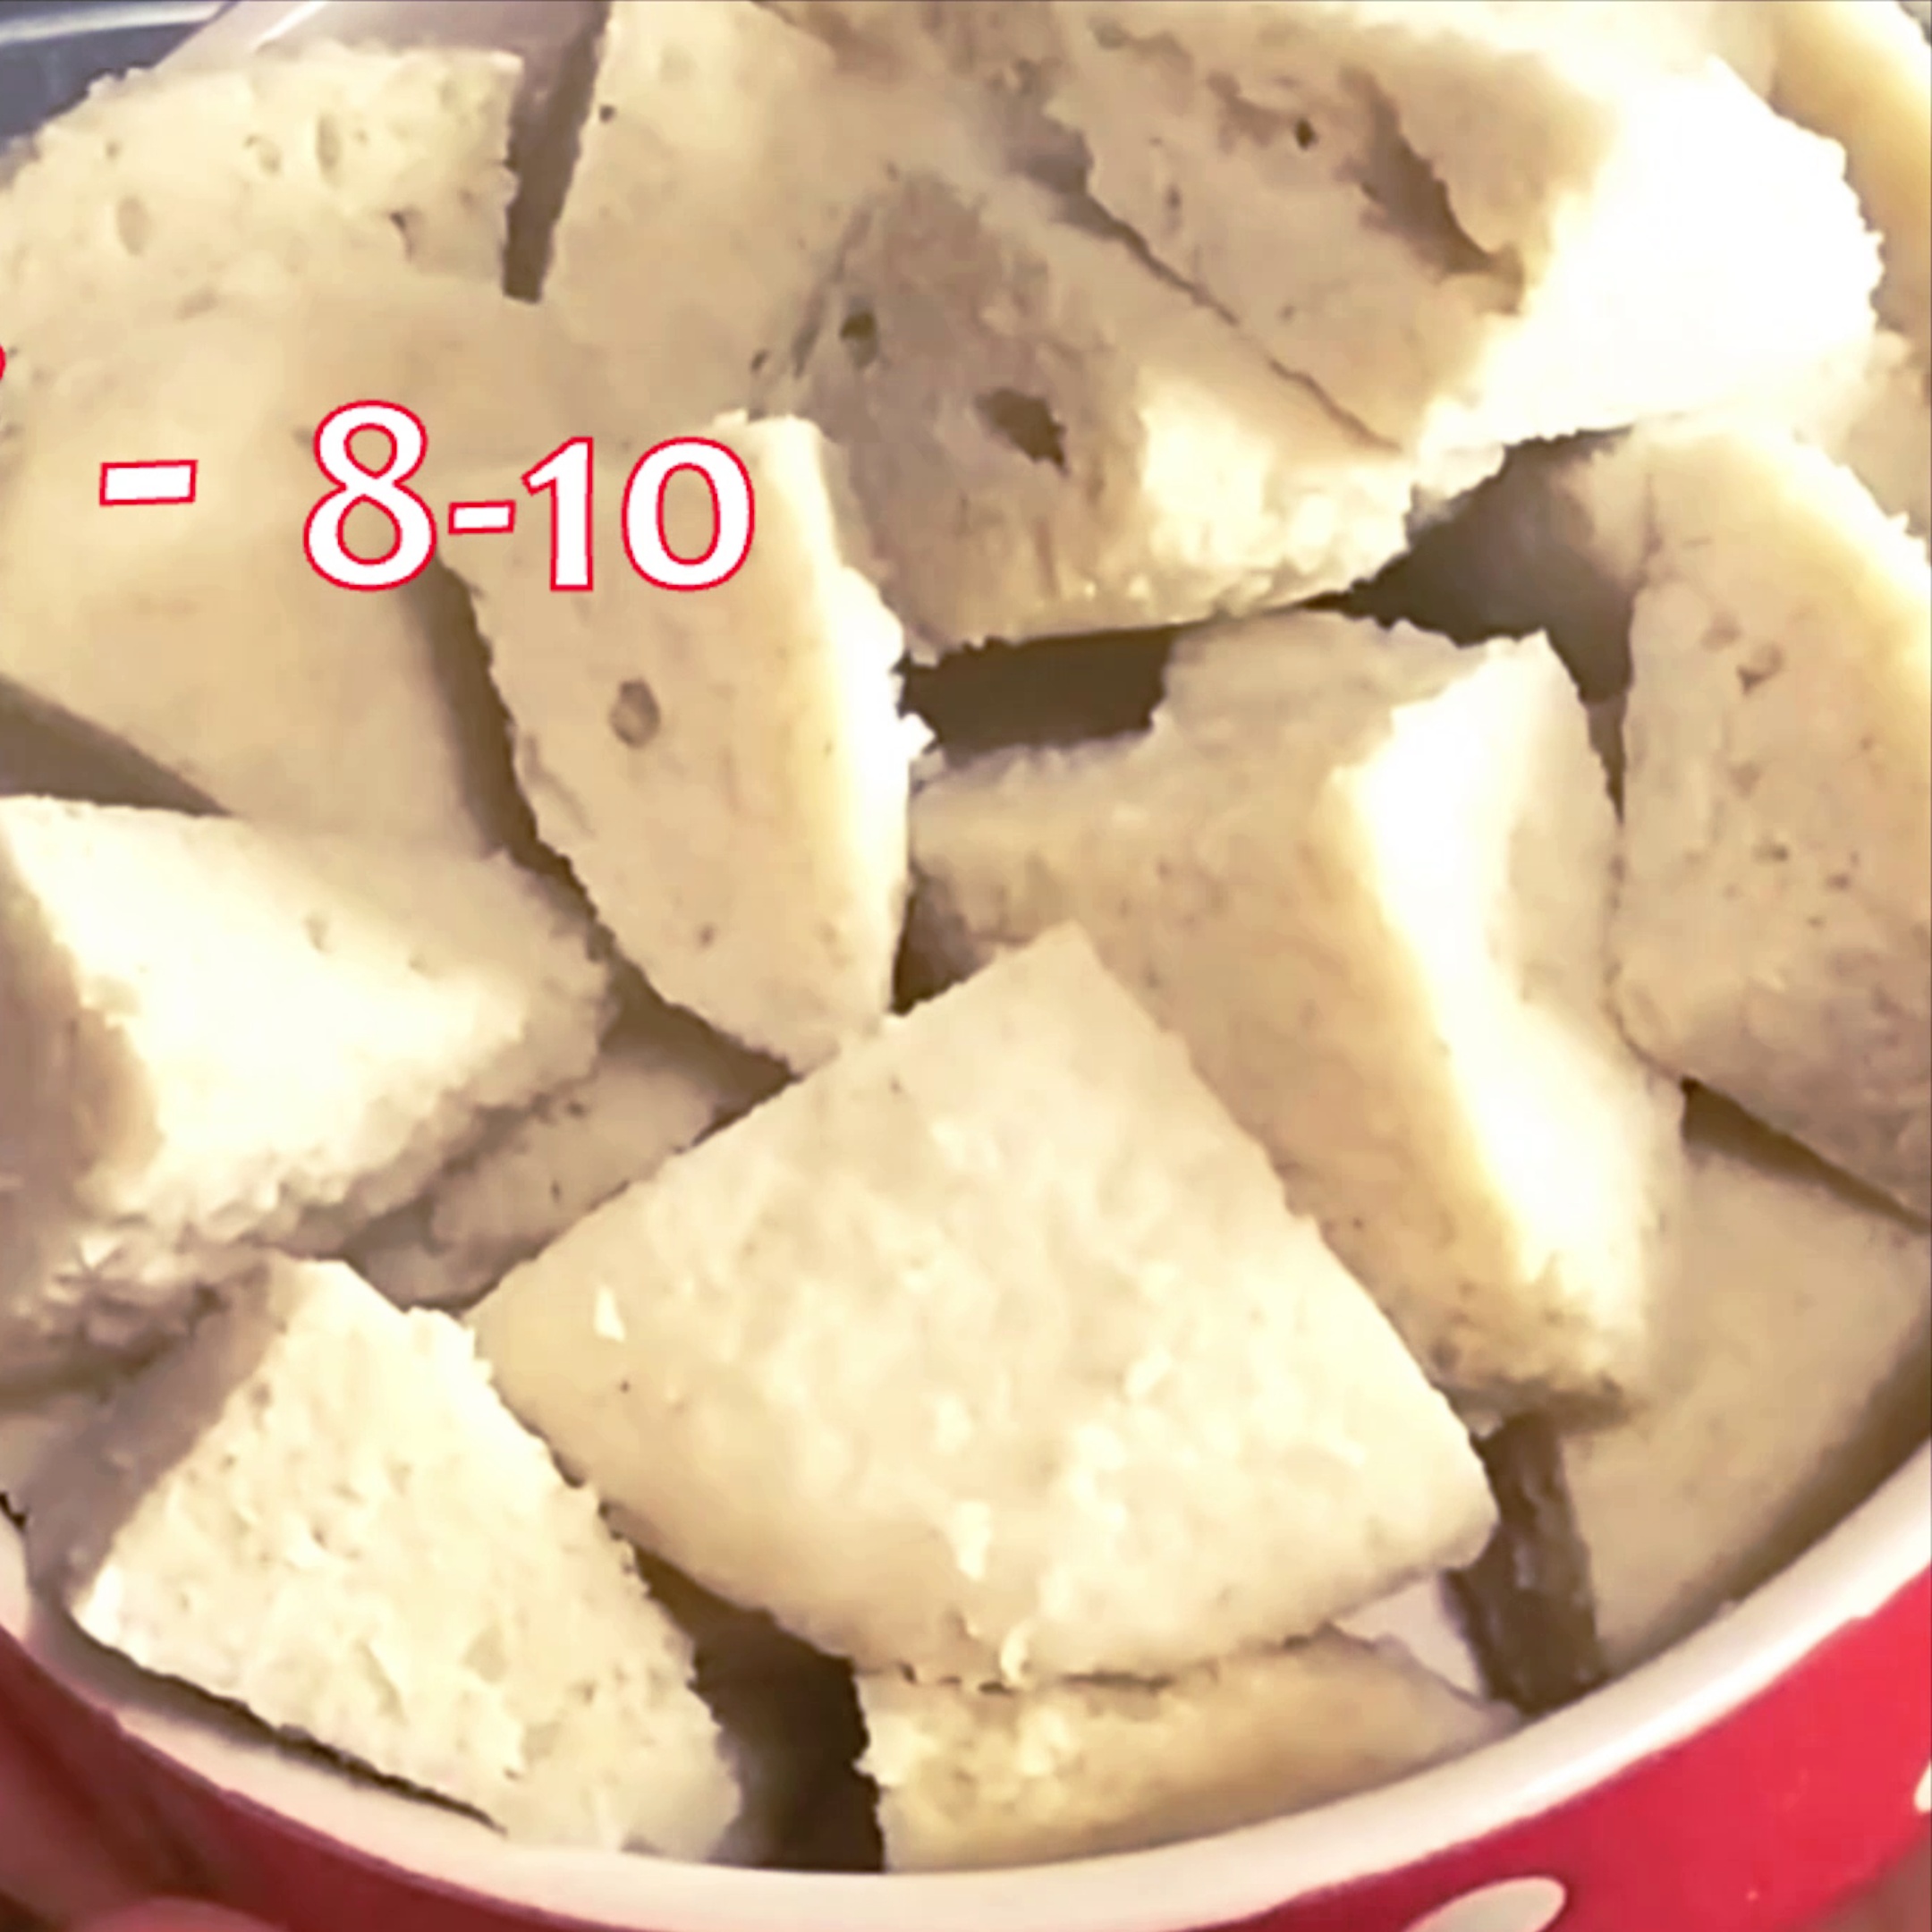 Step 1 - Cut idlis into quarters (4 pieces). I am using leftover idlis for making this recipe, if you are using fresh idlis, then refrigerate it for at least an hour to avoid breaking.